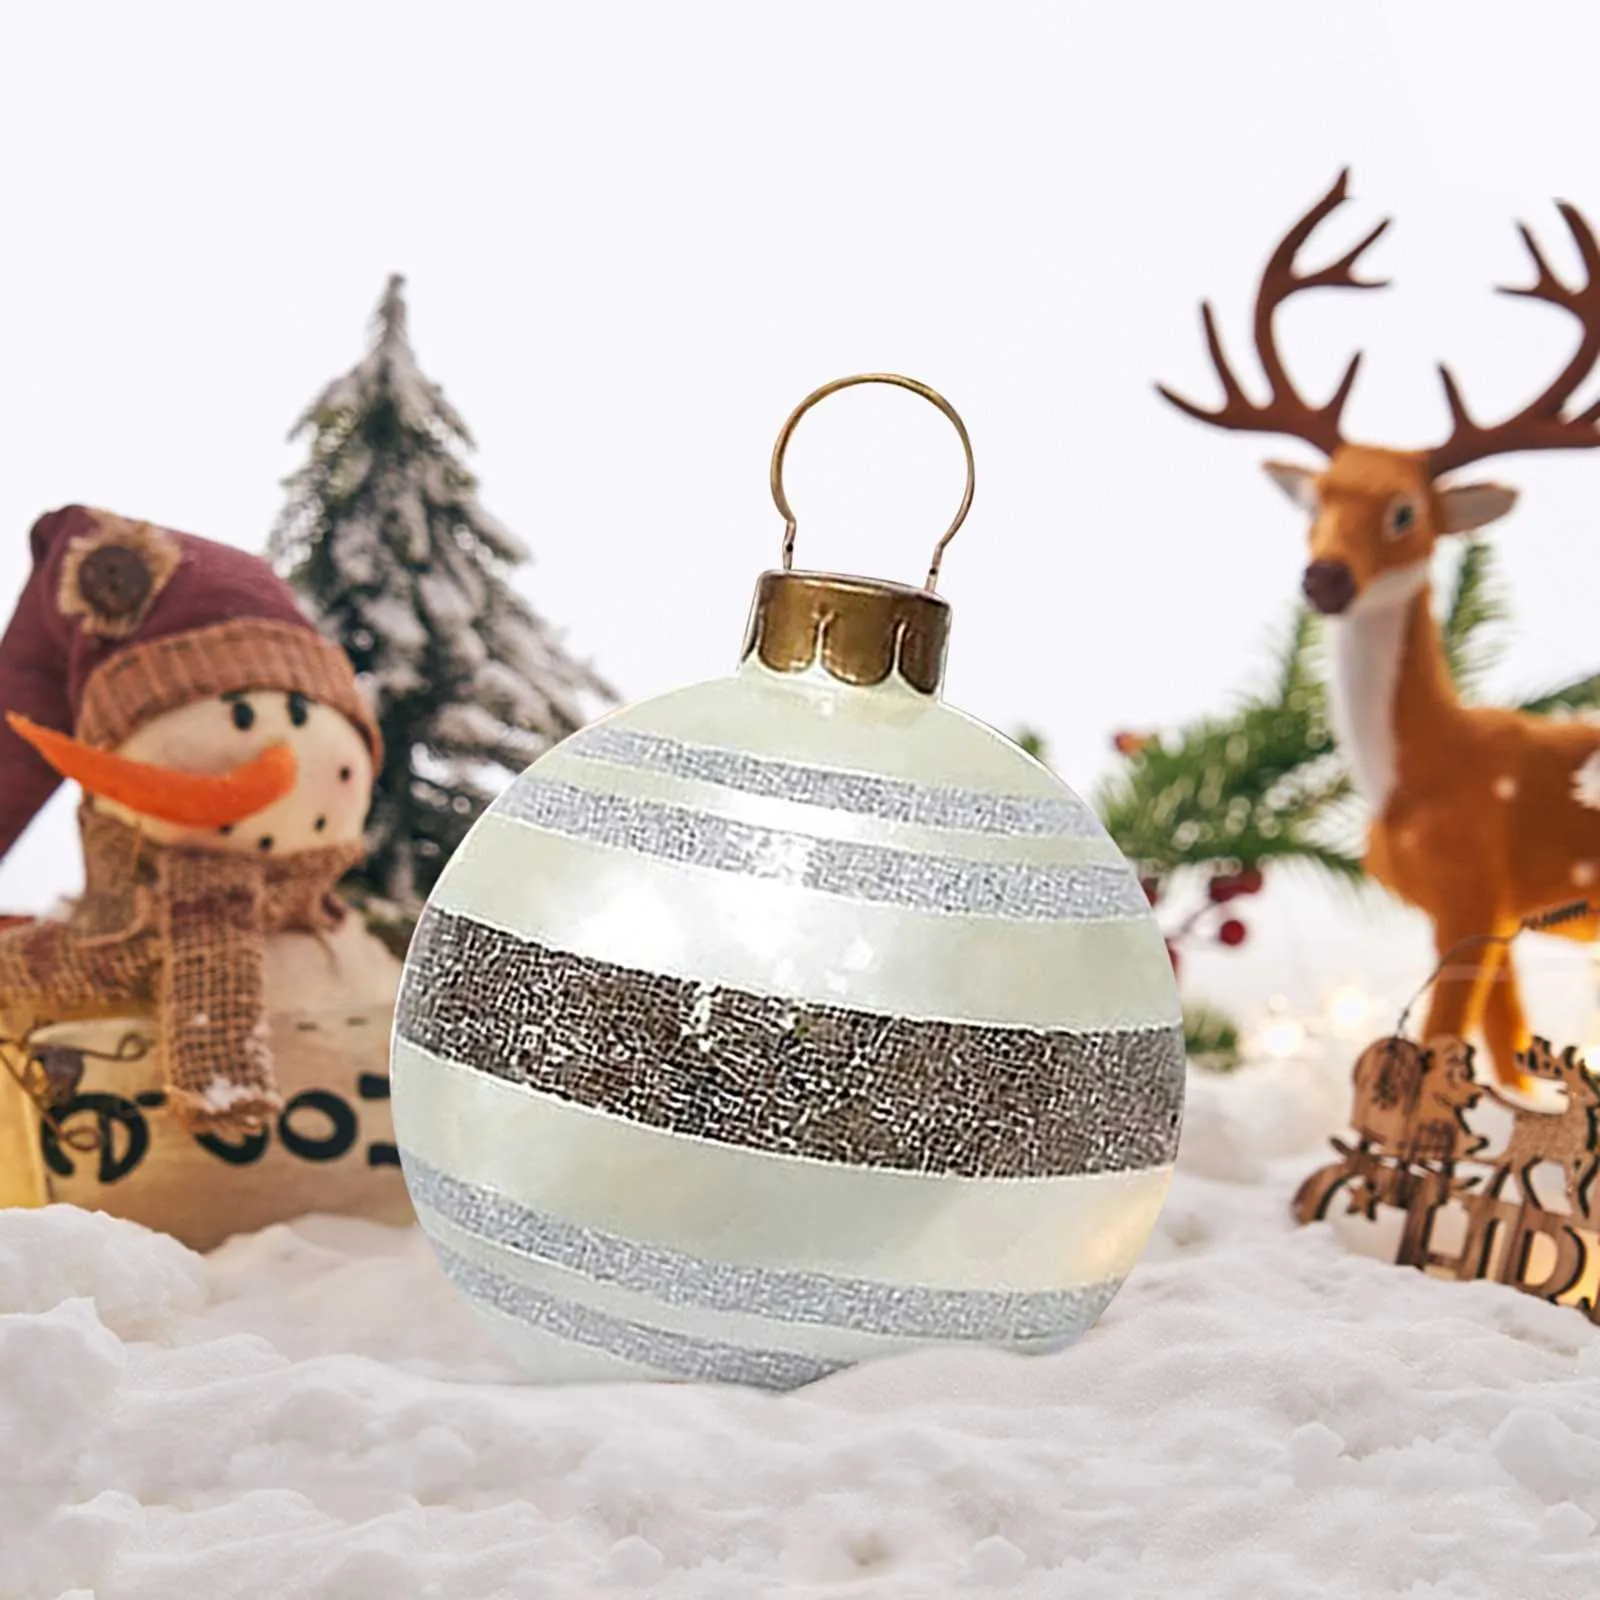 Outdoor Christmas Inflatable Decorated Ball Made of PVC 23 6 inch Giant Tree Decorations Holiday Decor 211018293R